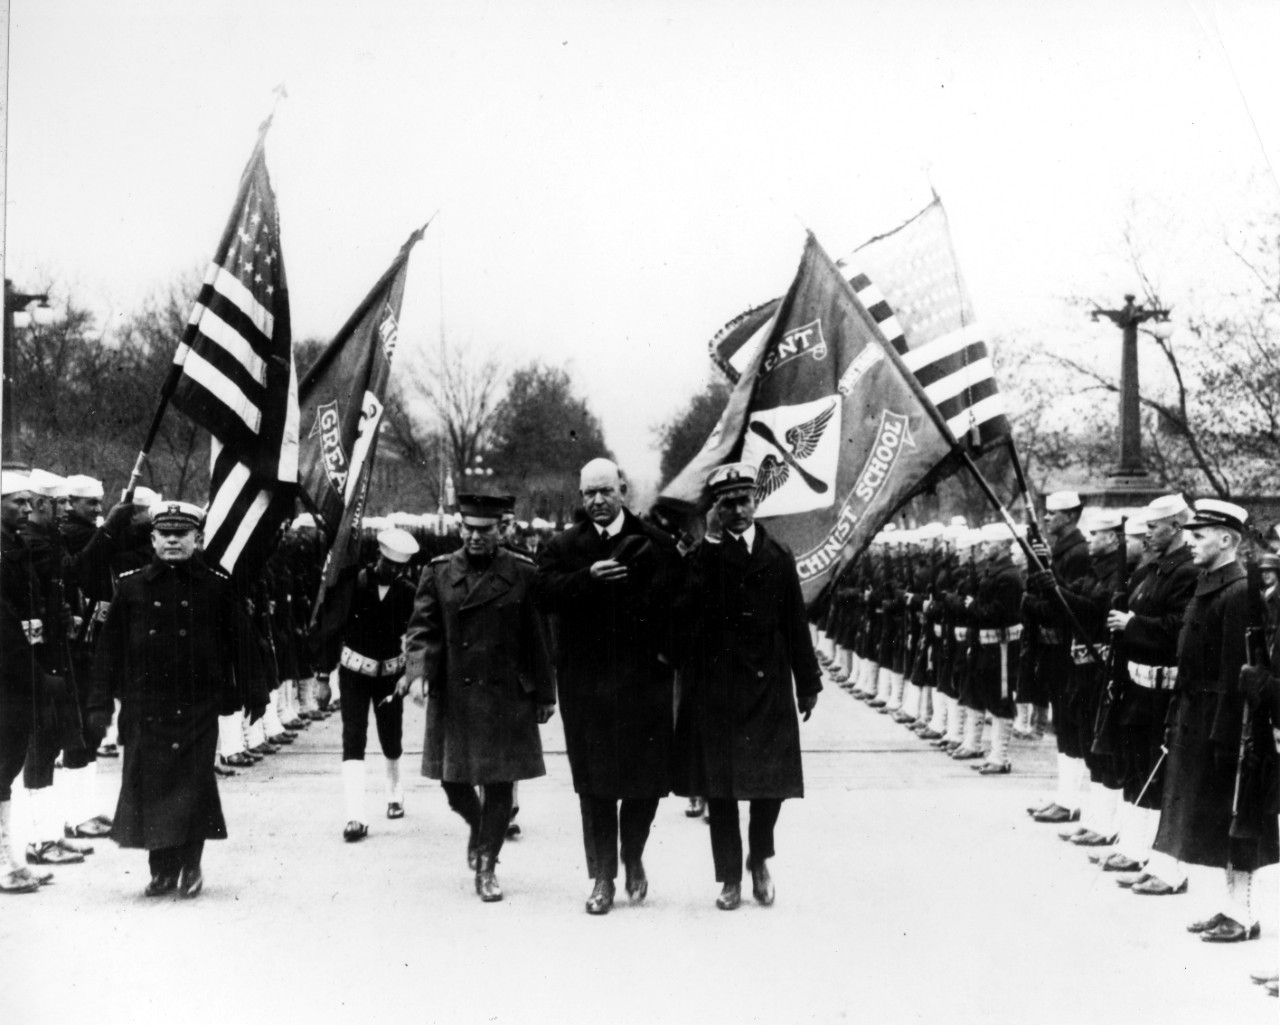 MGen John A. Lejune, SecNav Edwin Denby, and CAPT William A. Moffett inspect sailors at NTC Great lakes, IL during the early 1920s. Note the flag of aviation machinist school at right. 